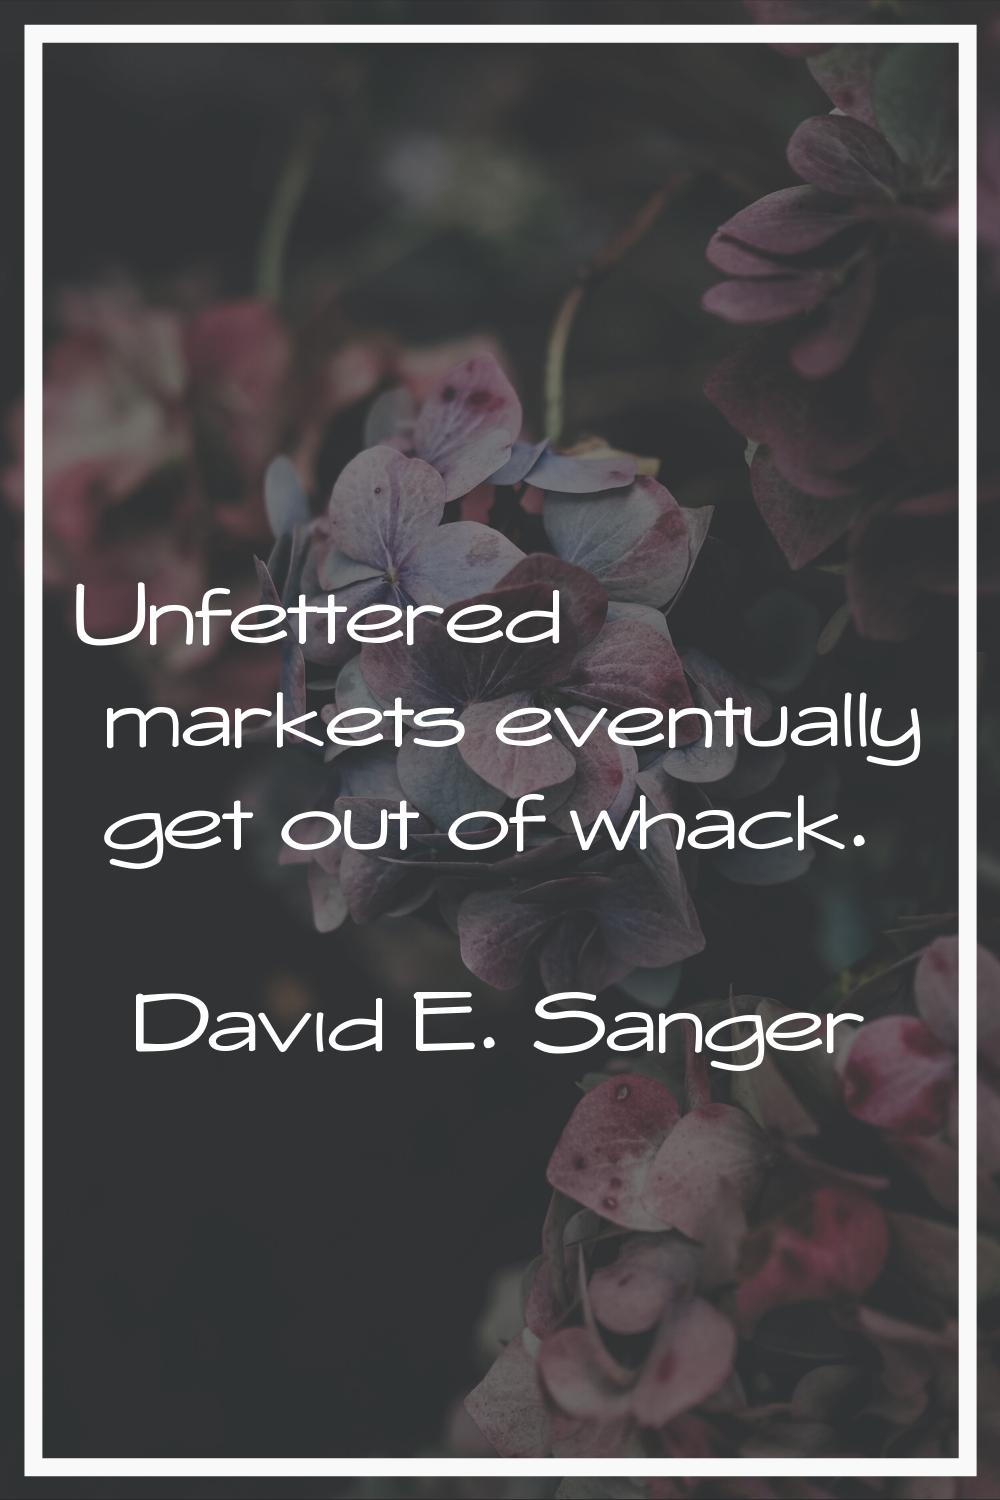 Unfettered markets eventually get out of whack.